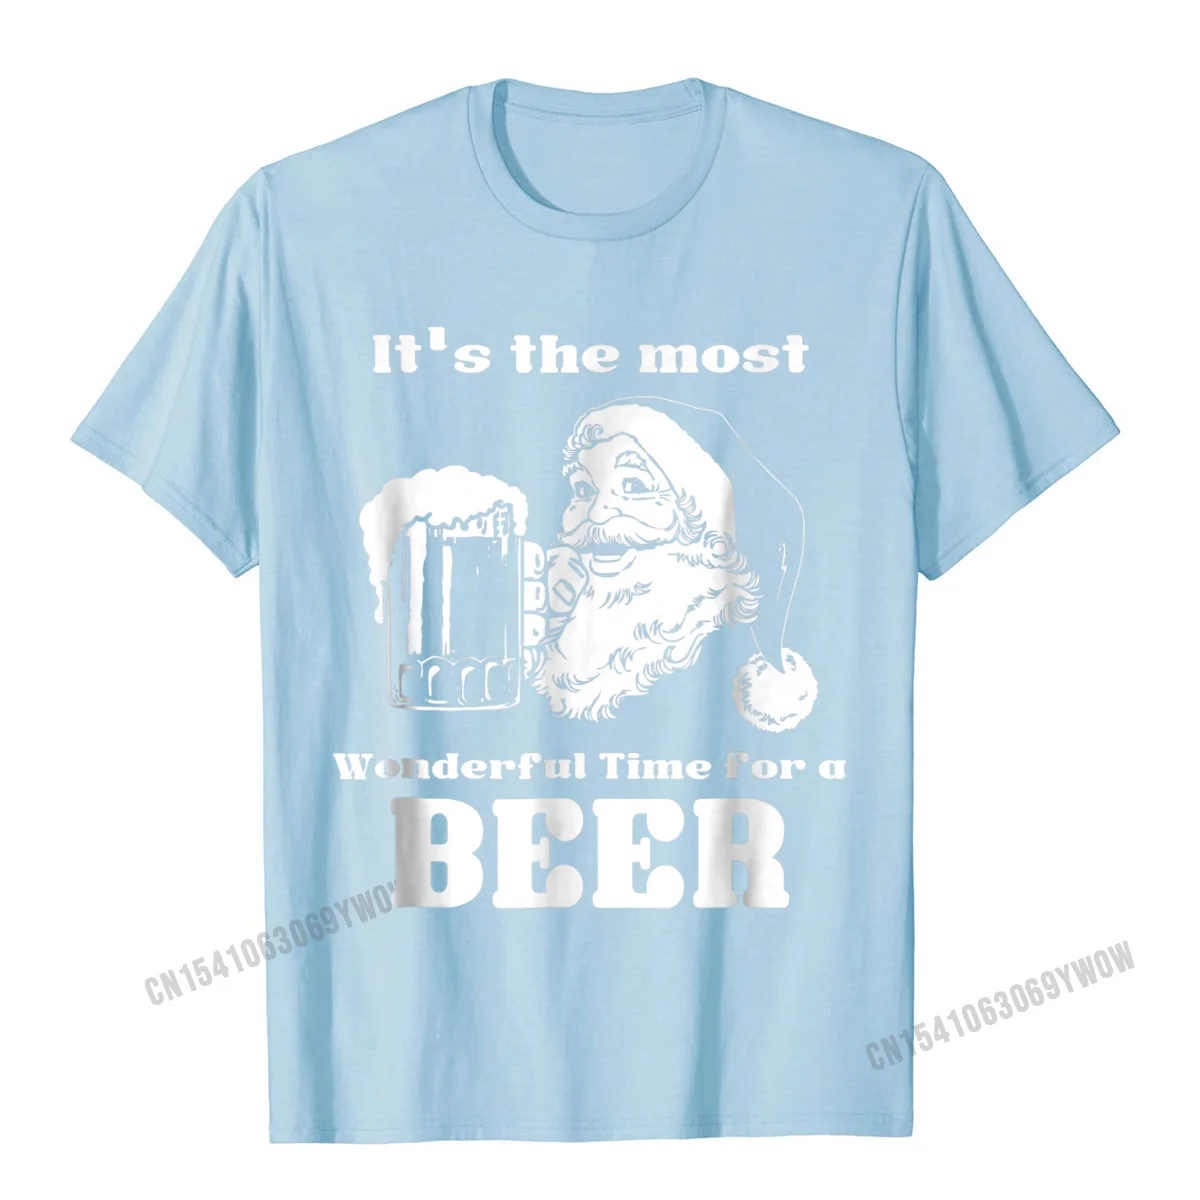 Fashionable Tops Tees Special Round Neck Slim Fit Short Sleeve Cotton Men T-shirts cosie Tee Shirts Drop Shipping Its the most wonderful time for a beer Christmas t-shirt__224 light